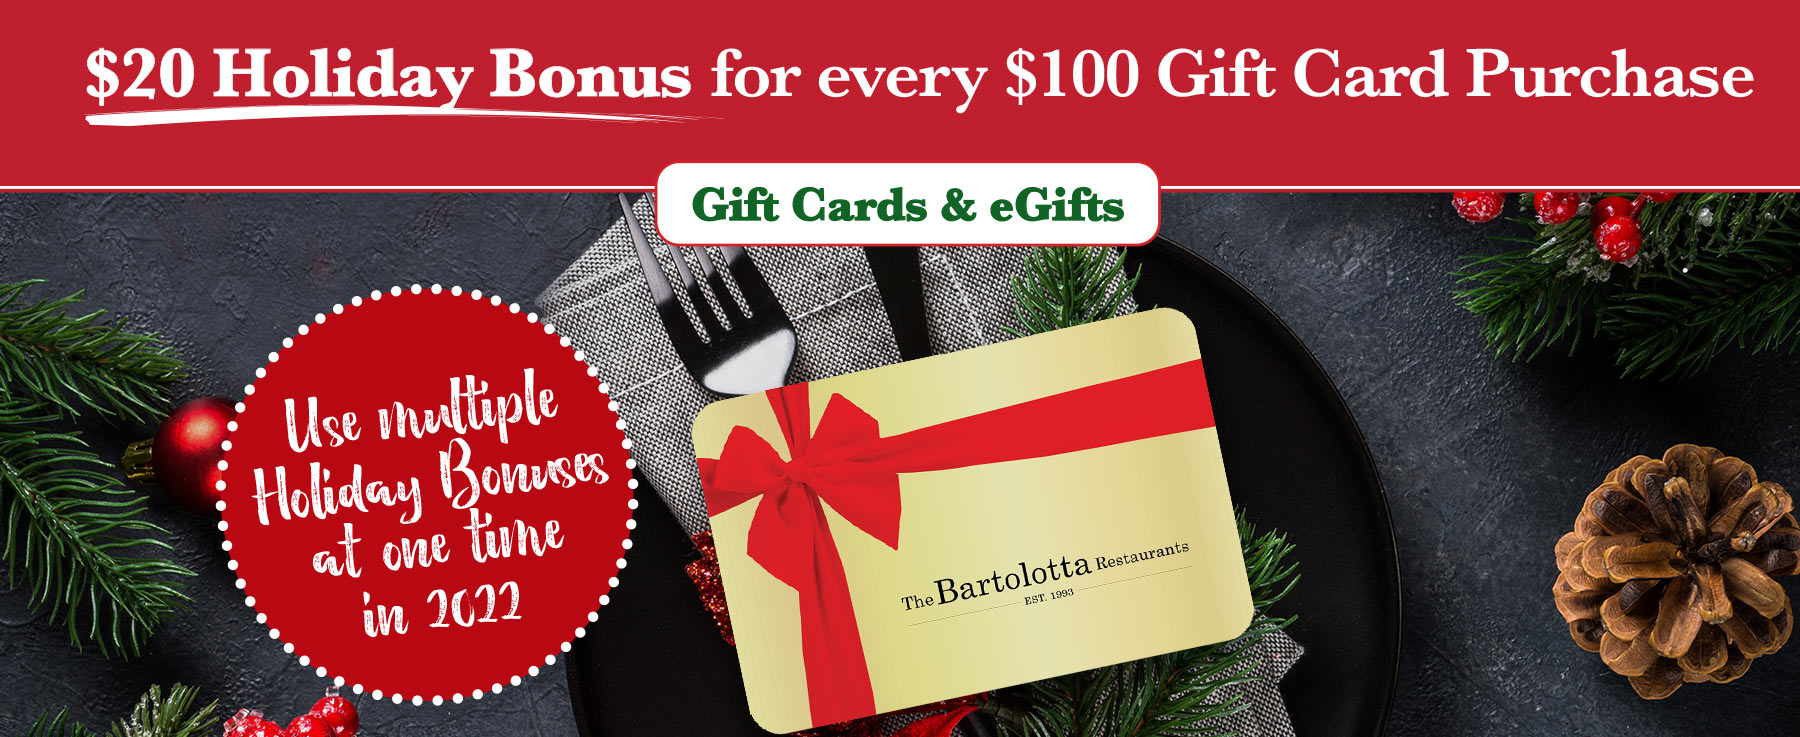 Bartolotta Gift Cards for the Holidays